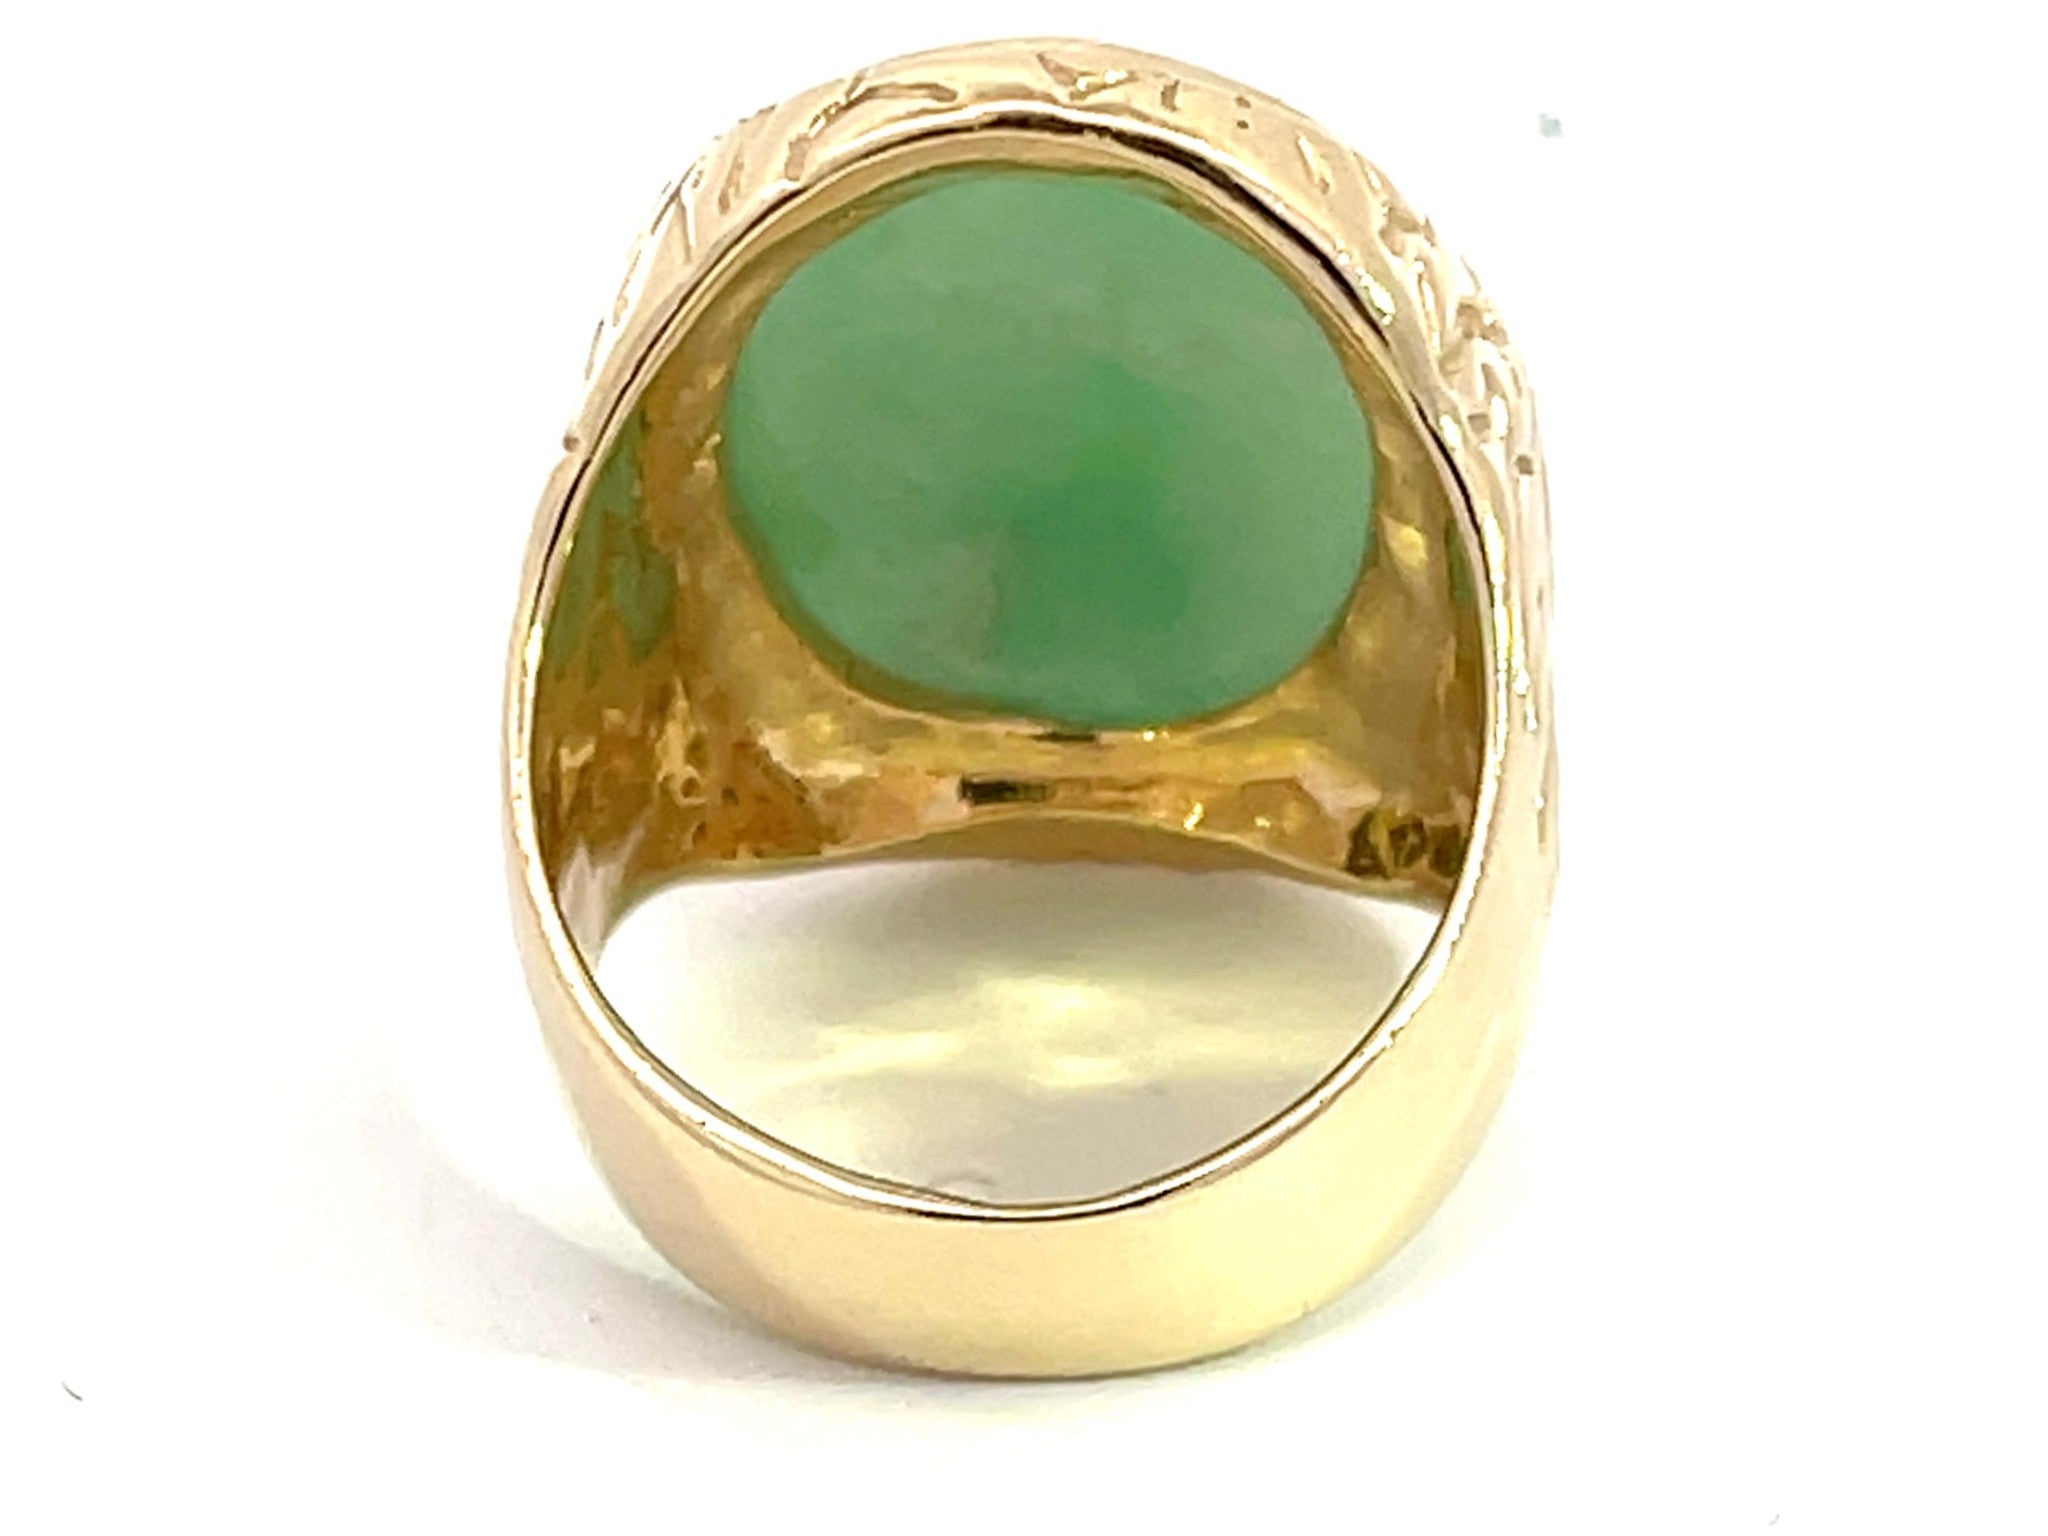 Oval Cabochon Green Jade Ring with Textured Bark Shoulders in 14K Yellow Gold